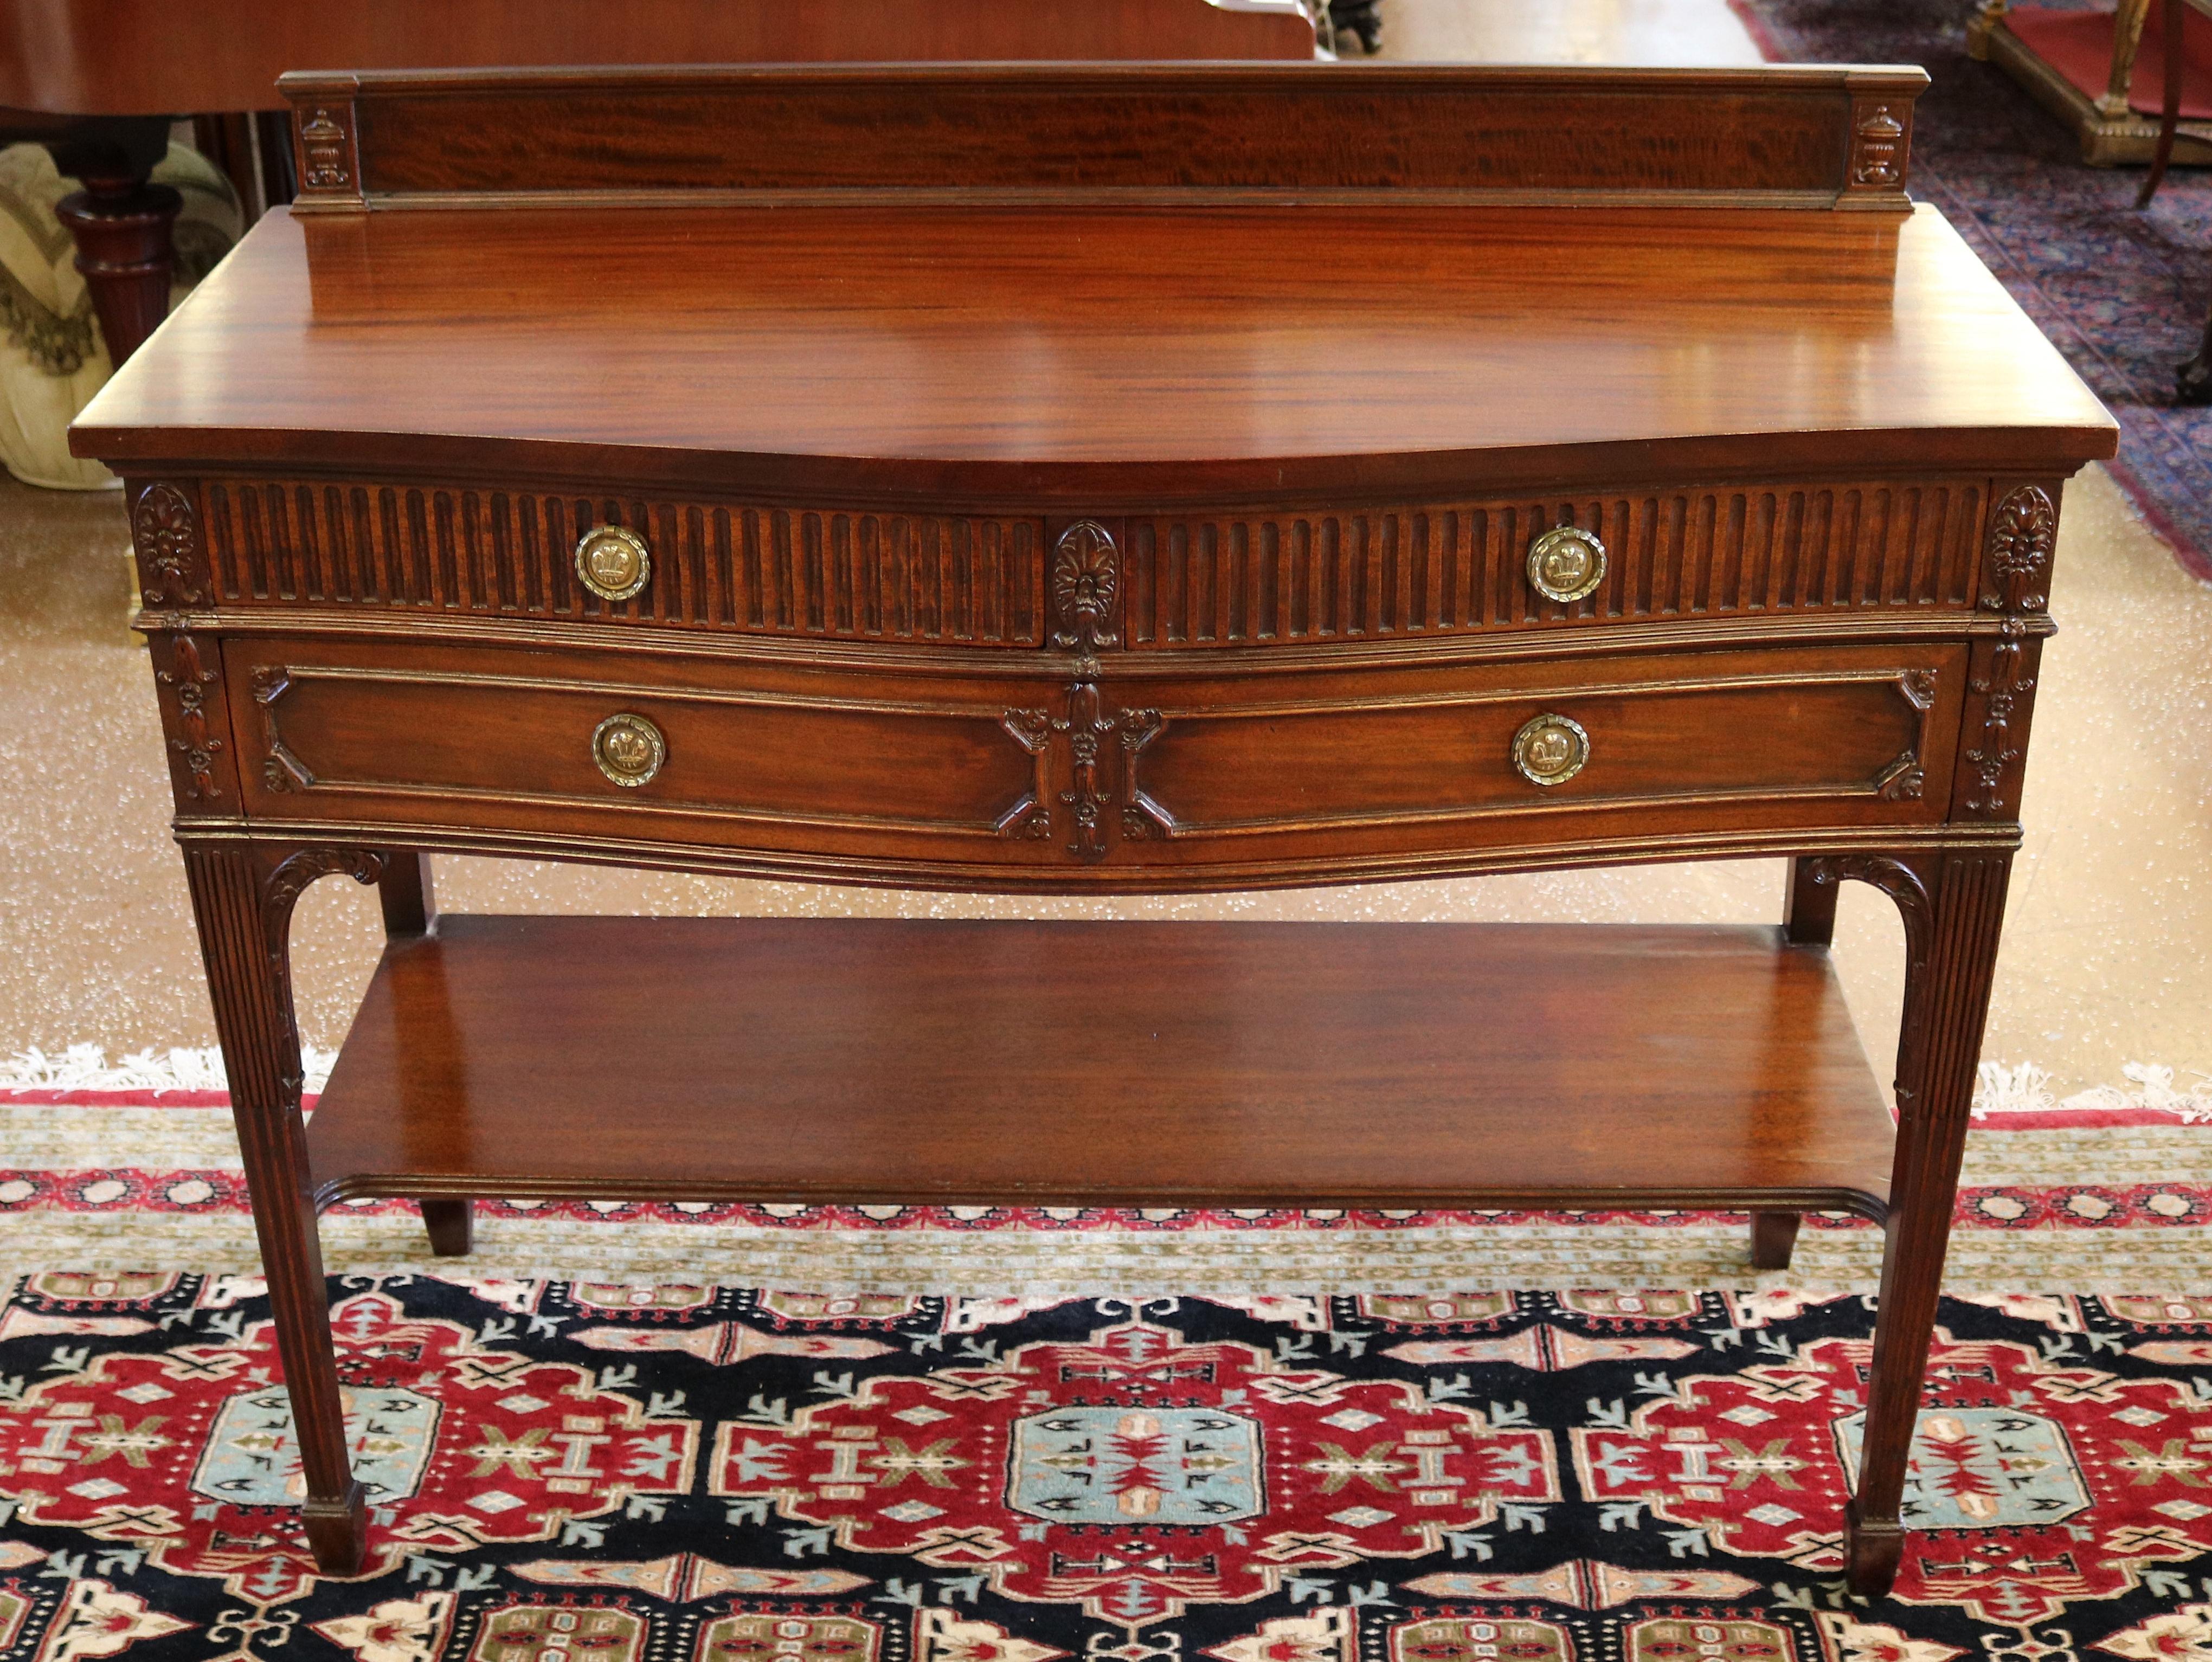 ​Early 20th Century Mahogany Adams Style Sideboard Server Buffet Made In Boston

Dimensions : 48.25